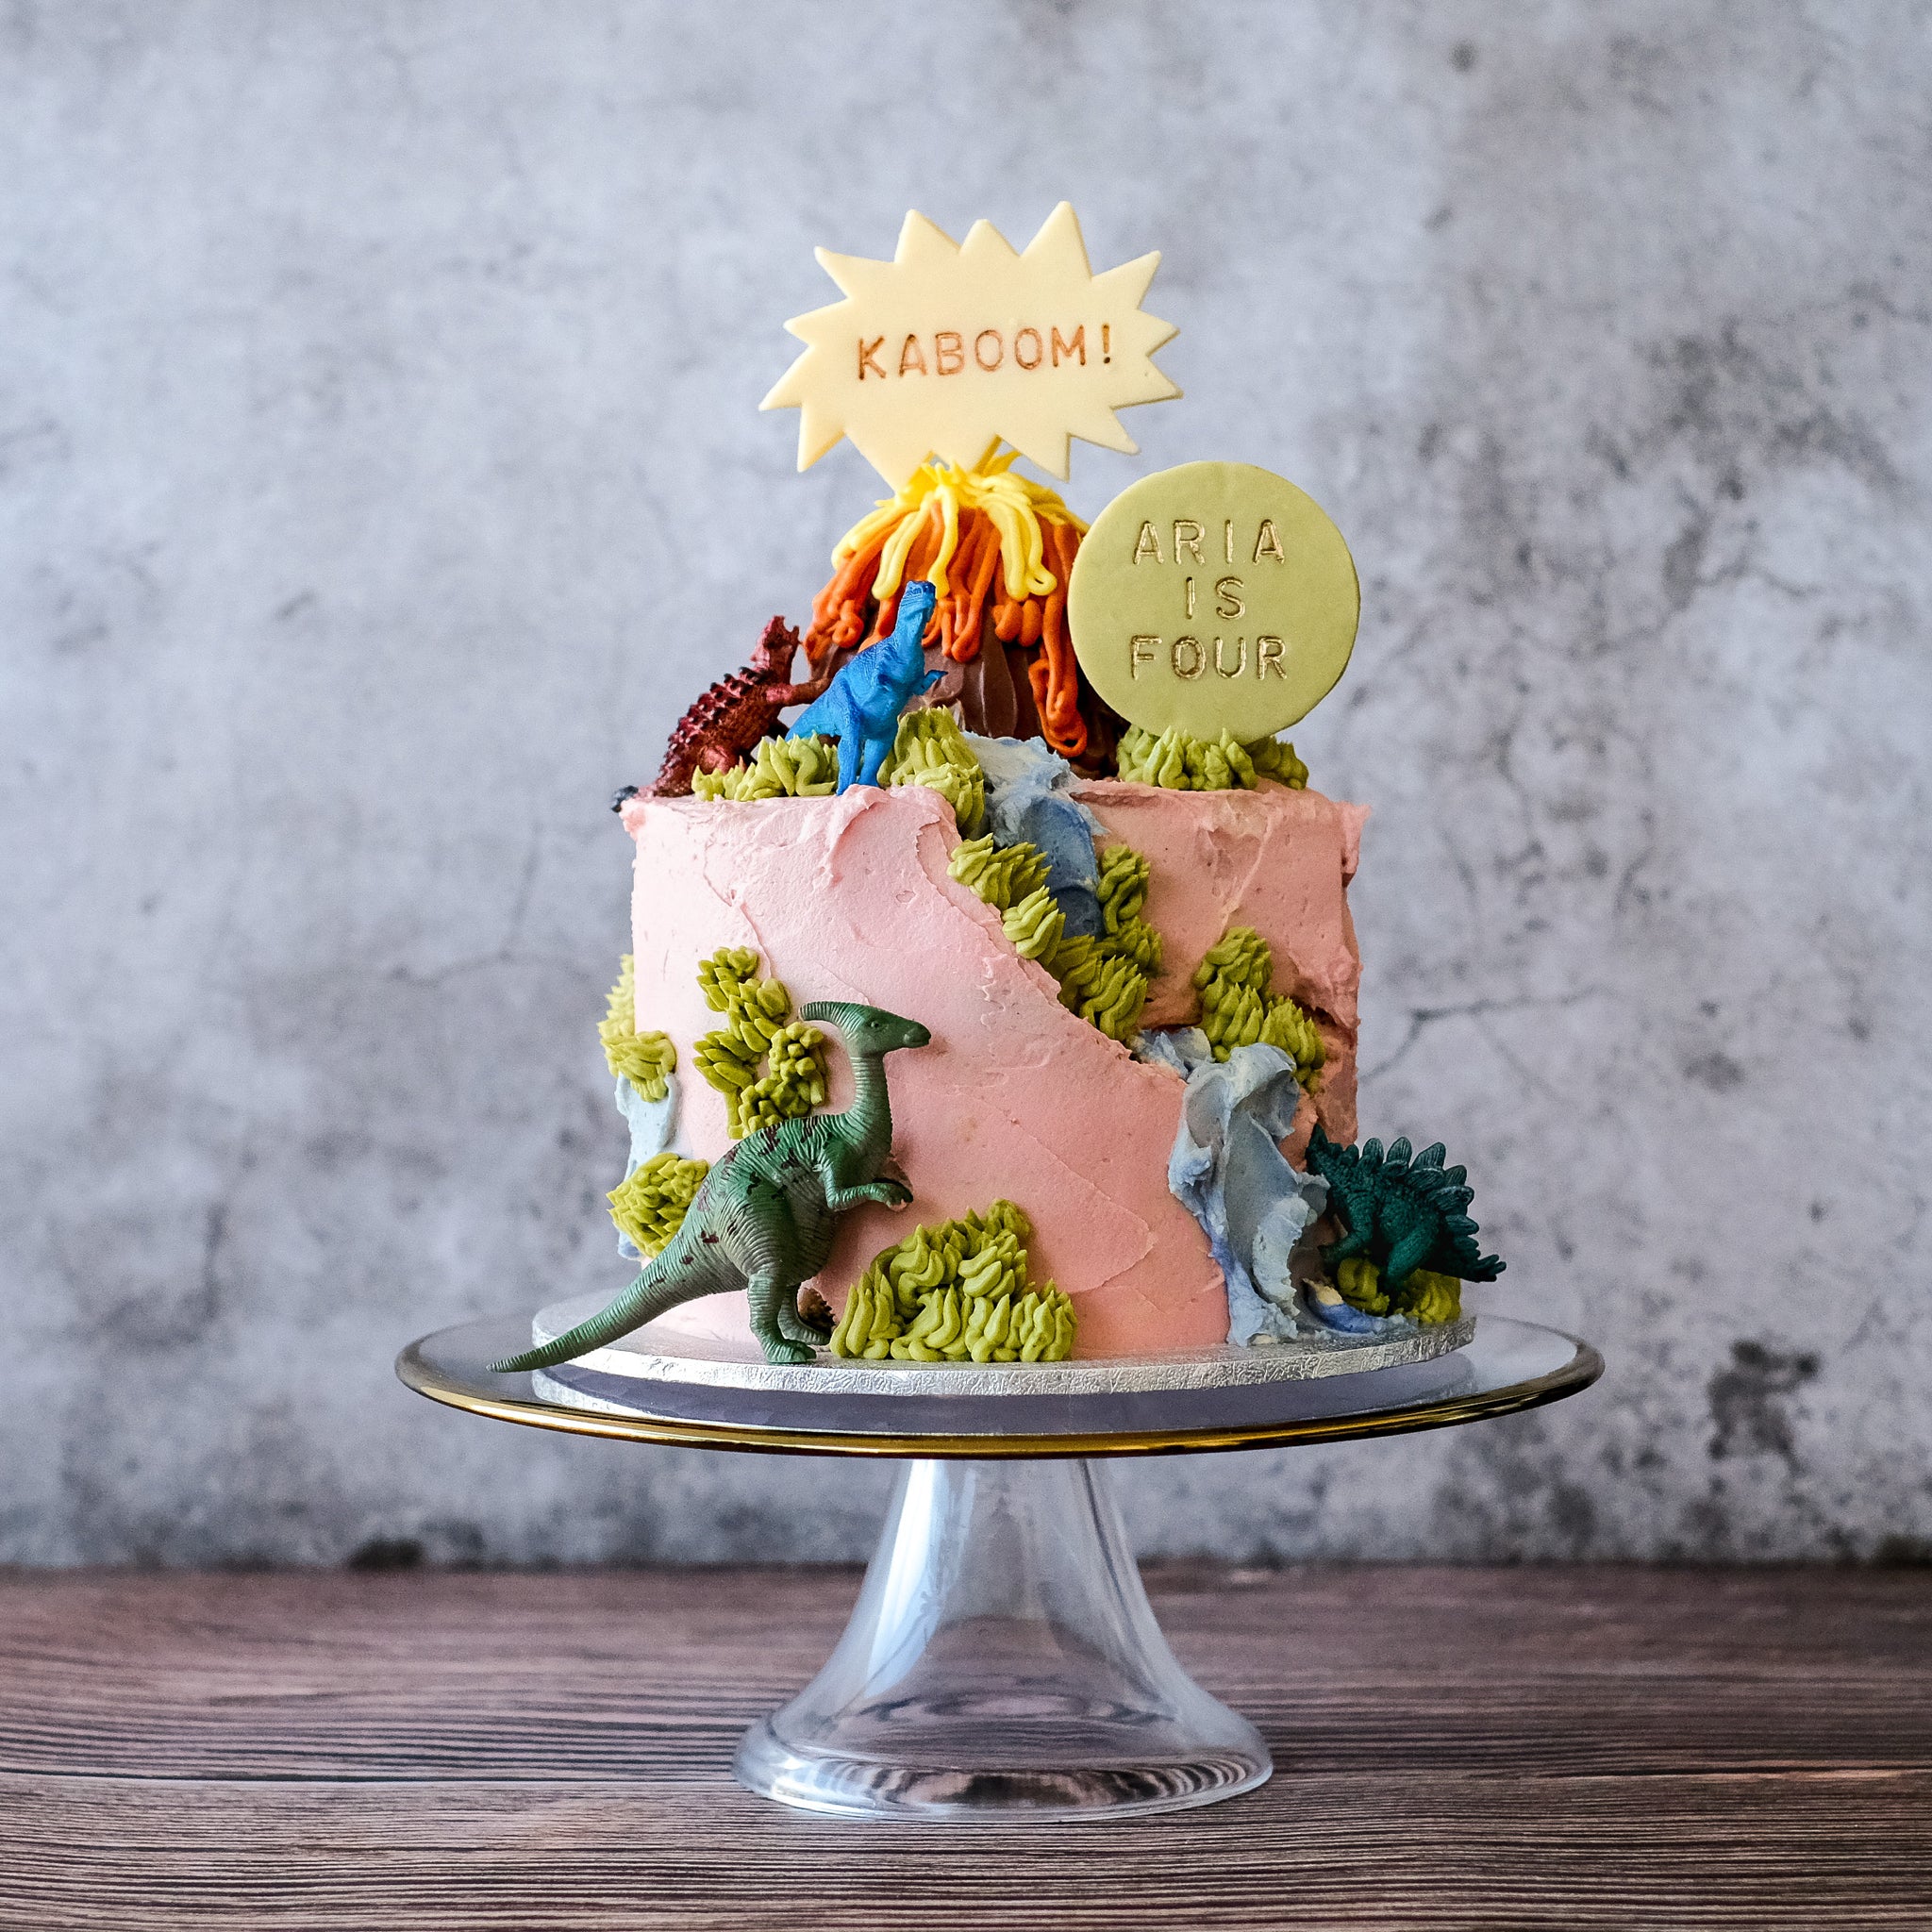 15 Of The Best Cakes In Perth | URBAN LIST PERTH